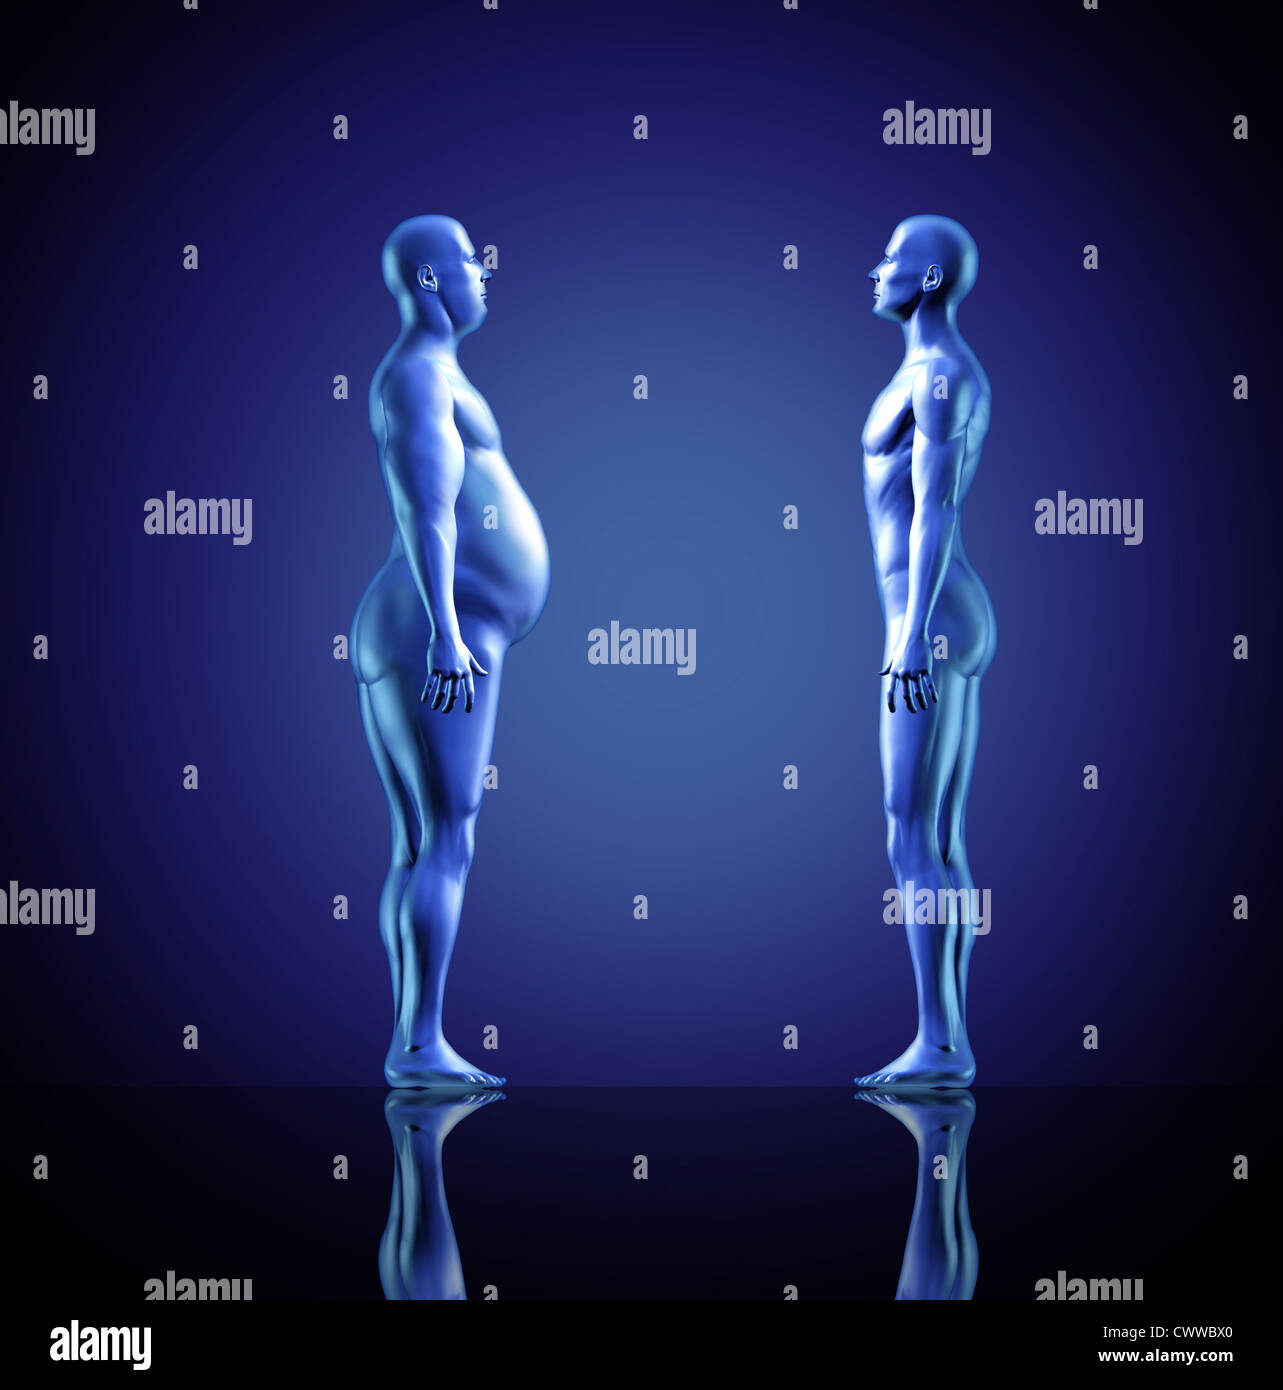 Dieting and losing weight symbol with an over weight man facing a normal fit human representing the concept of eating disorder and nutrition for a healthy lifestyle. Stock Photo